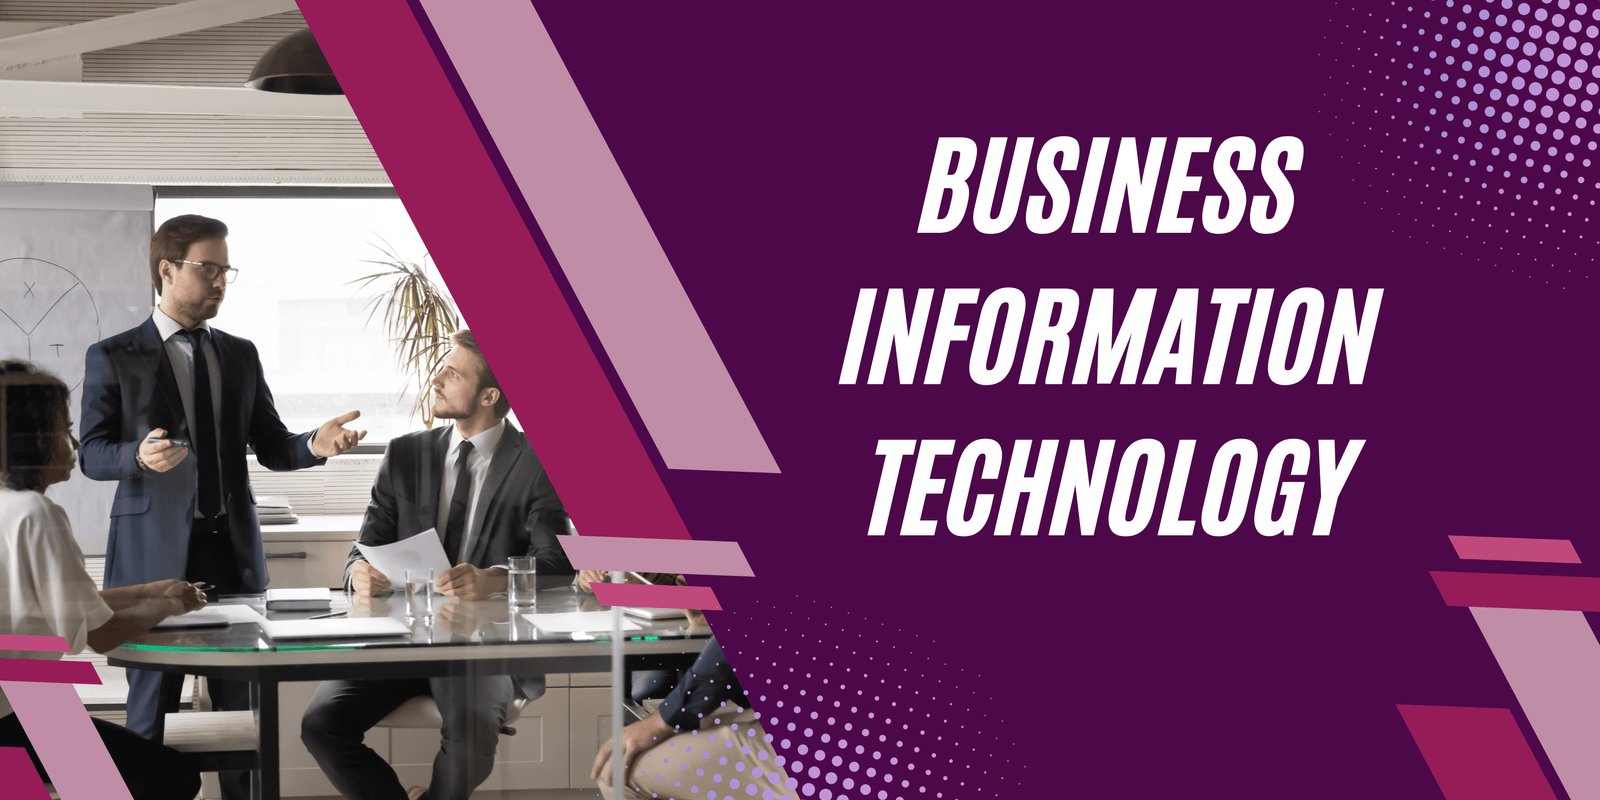 The use of technology to grow a business is called business information technology. It involves communication, software development, computer applications, and more.